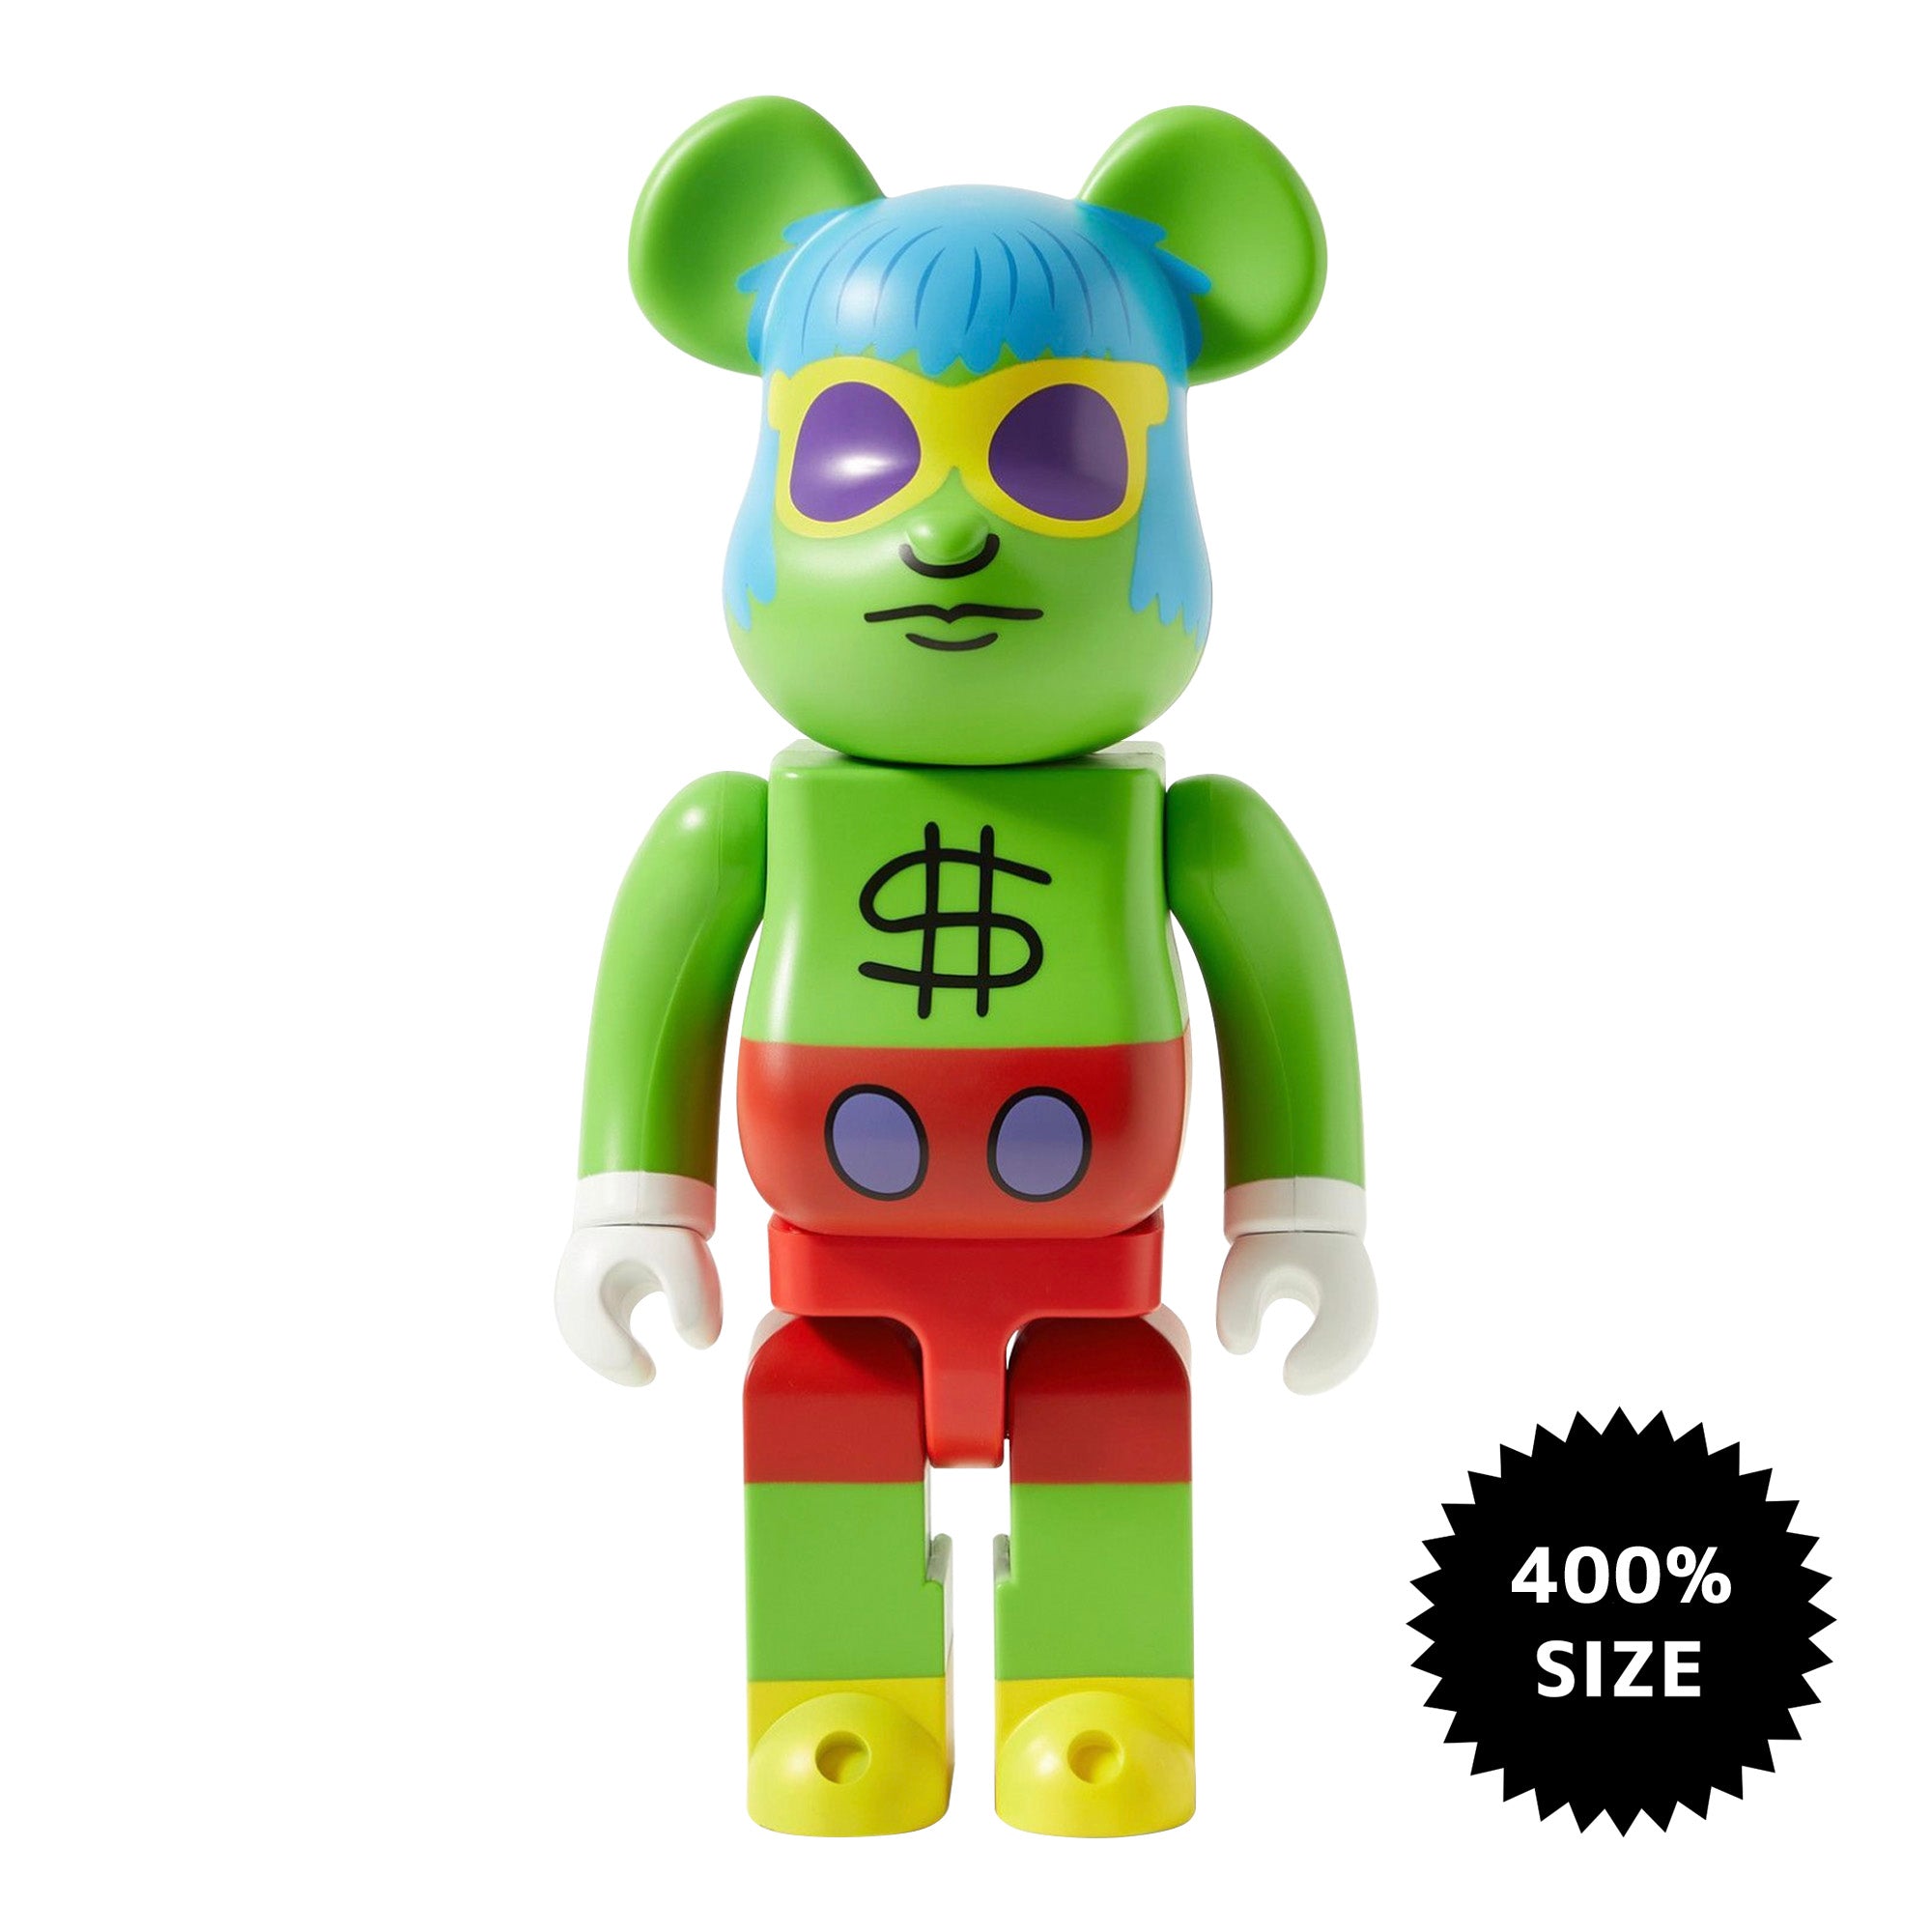 MEDICOM TOY: BE@RBRICK - Keith Haring Andy Mouse 400% – TOY TOKYO